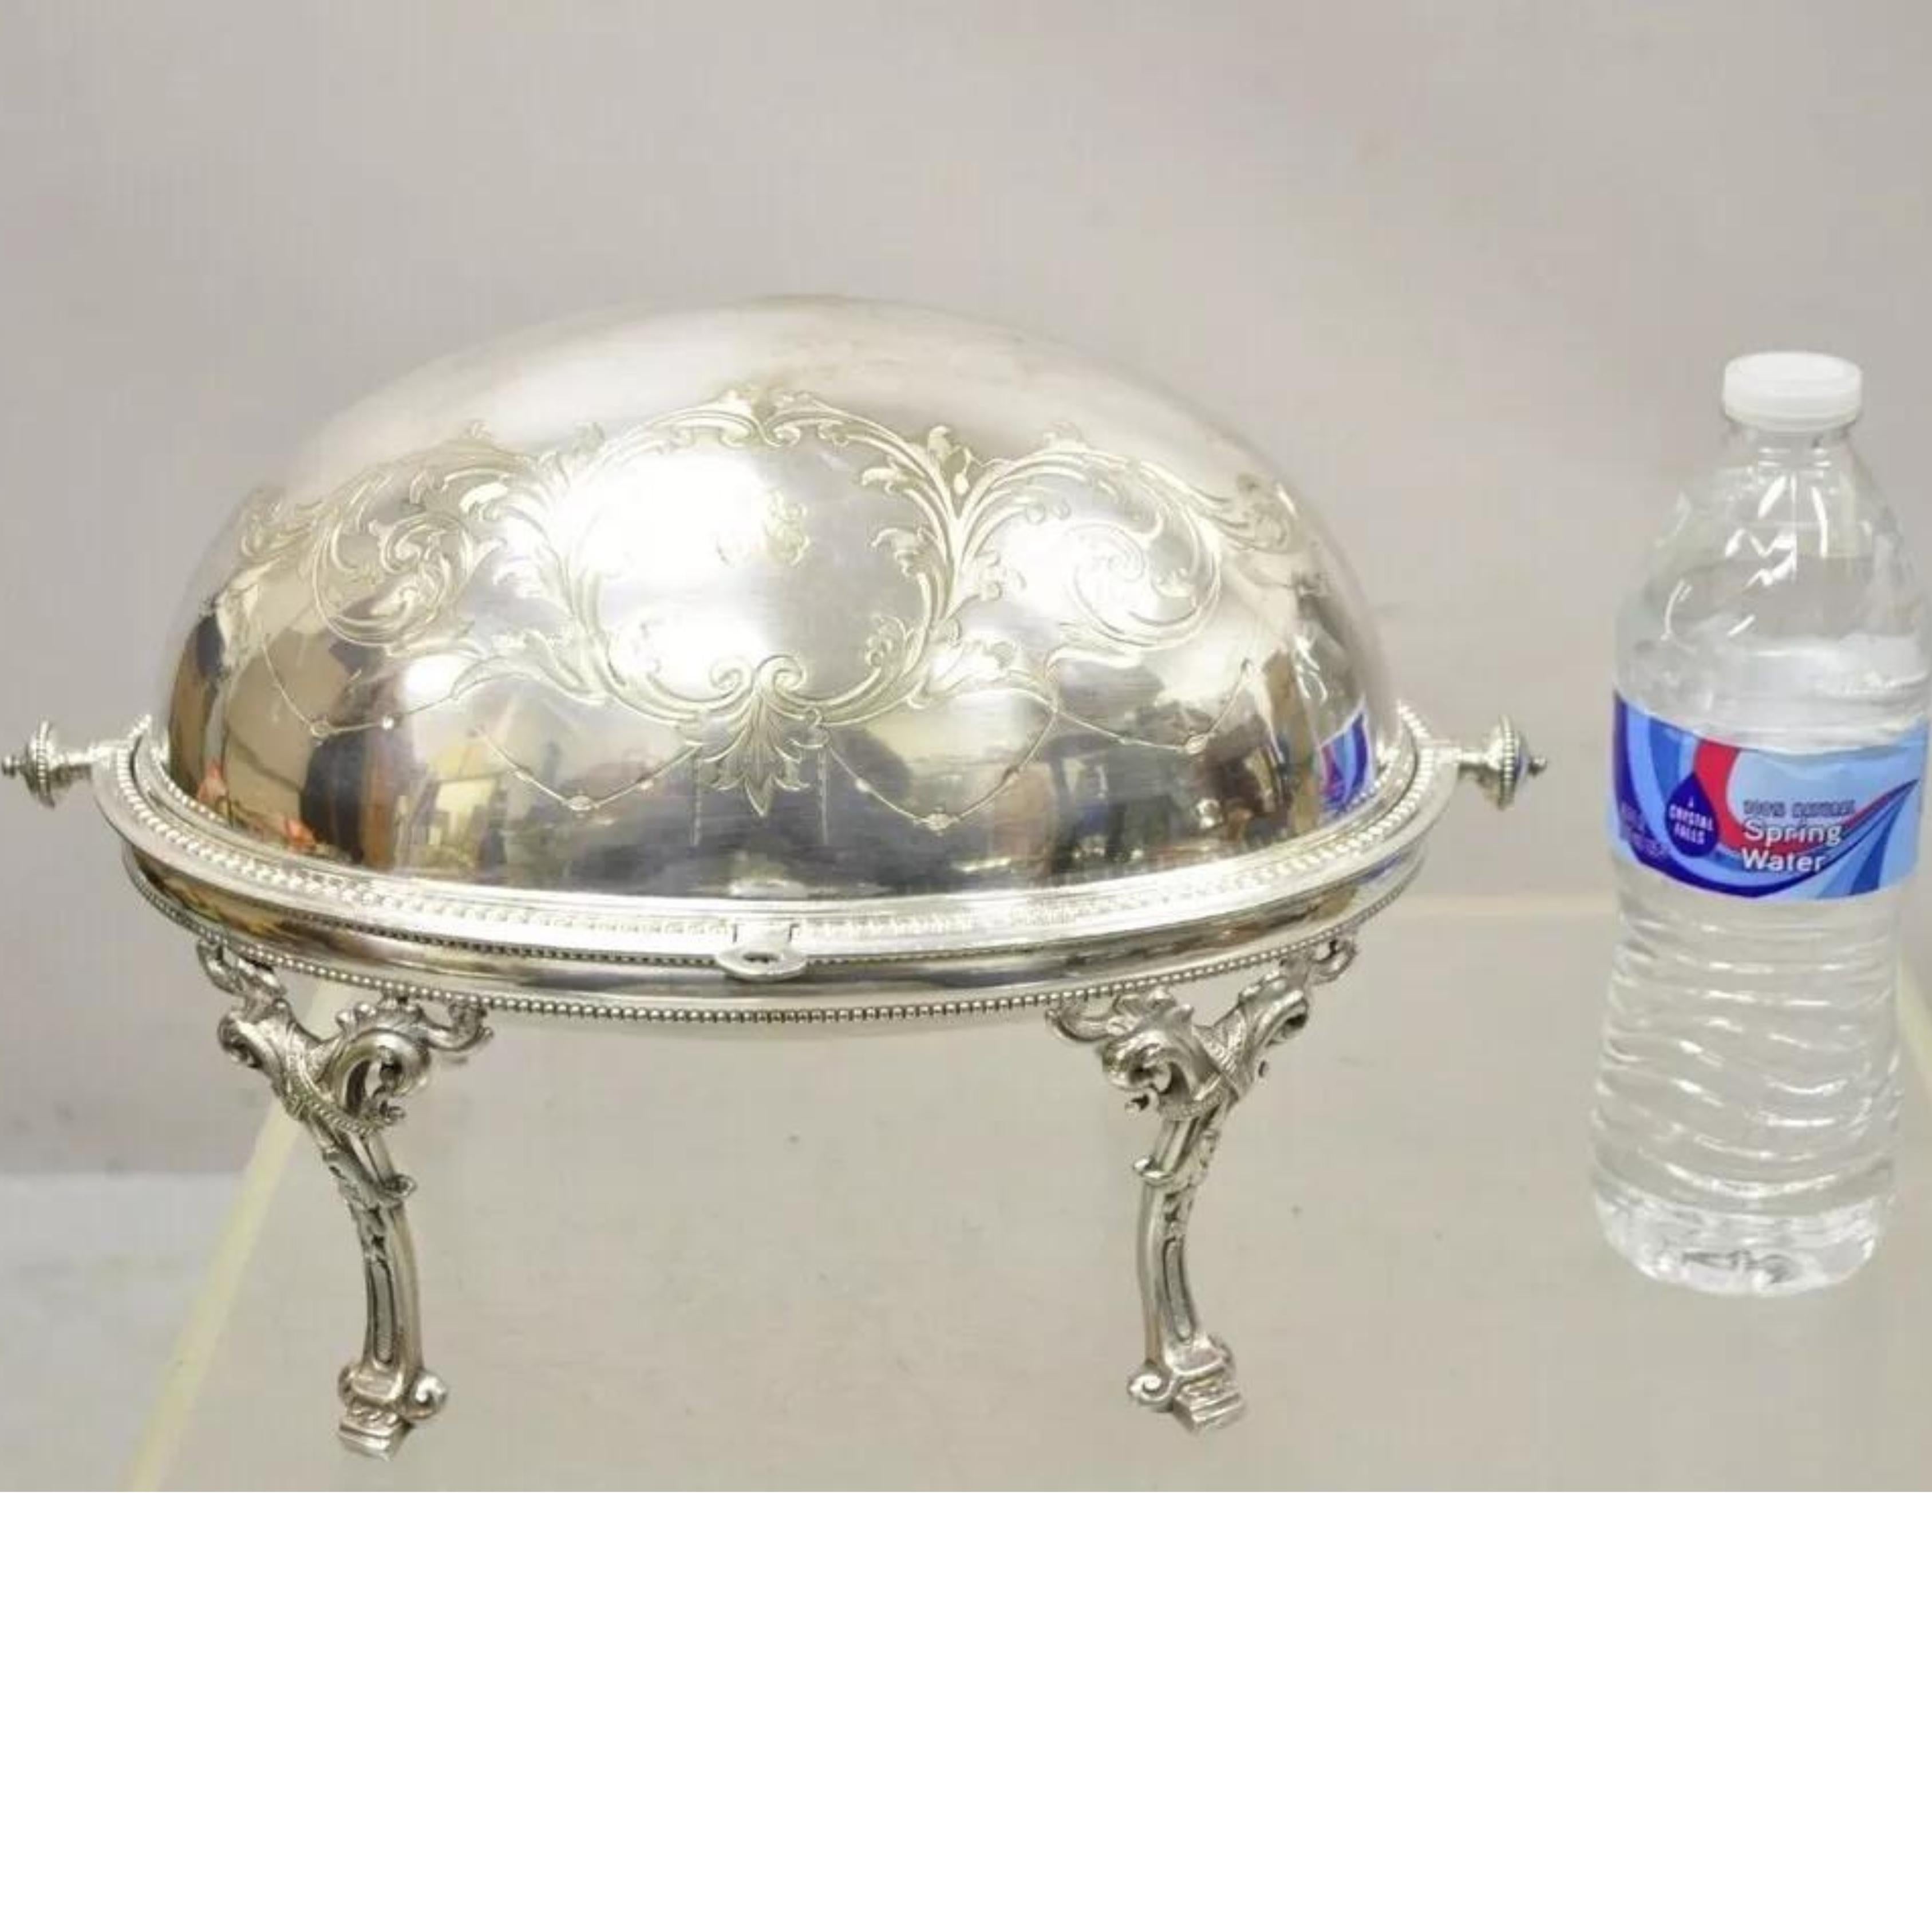 Antique Edwardian Silver Plated Revolving Dome Oval Chafing Dish Food Warmer For Sale 6